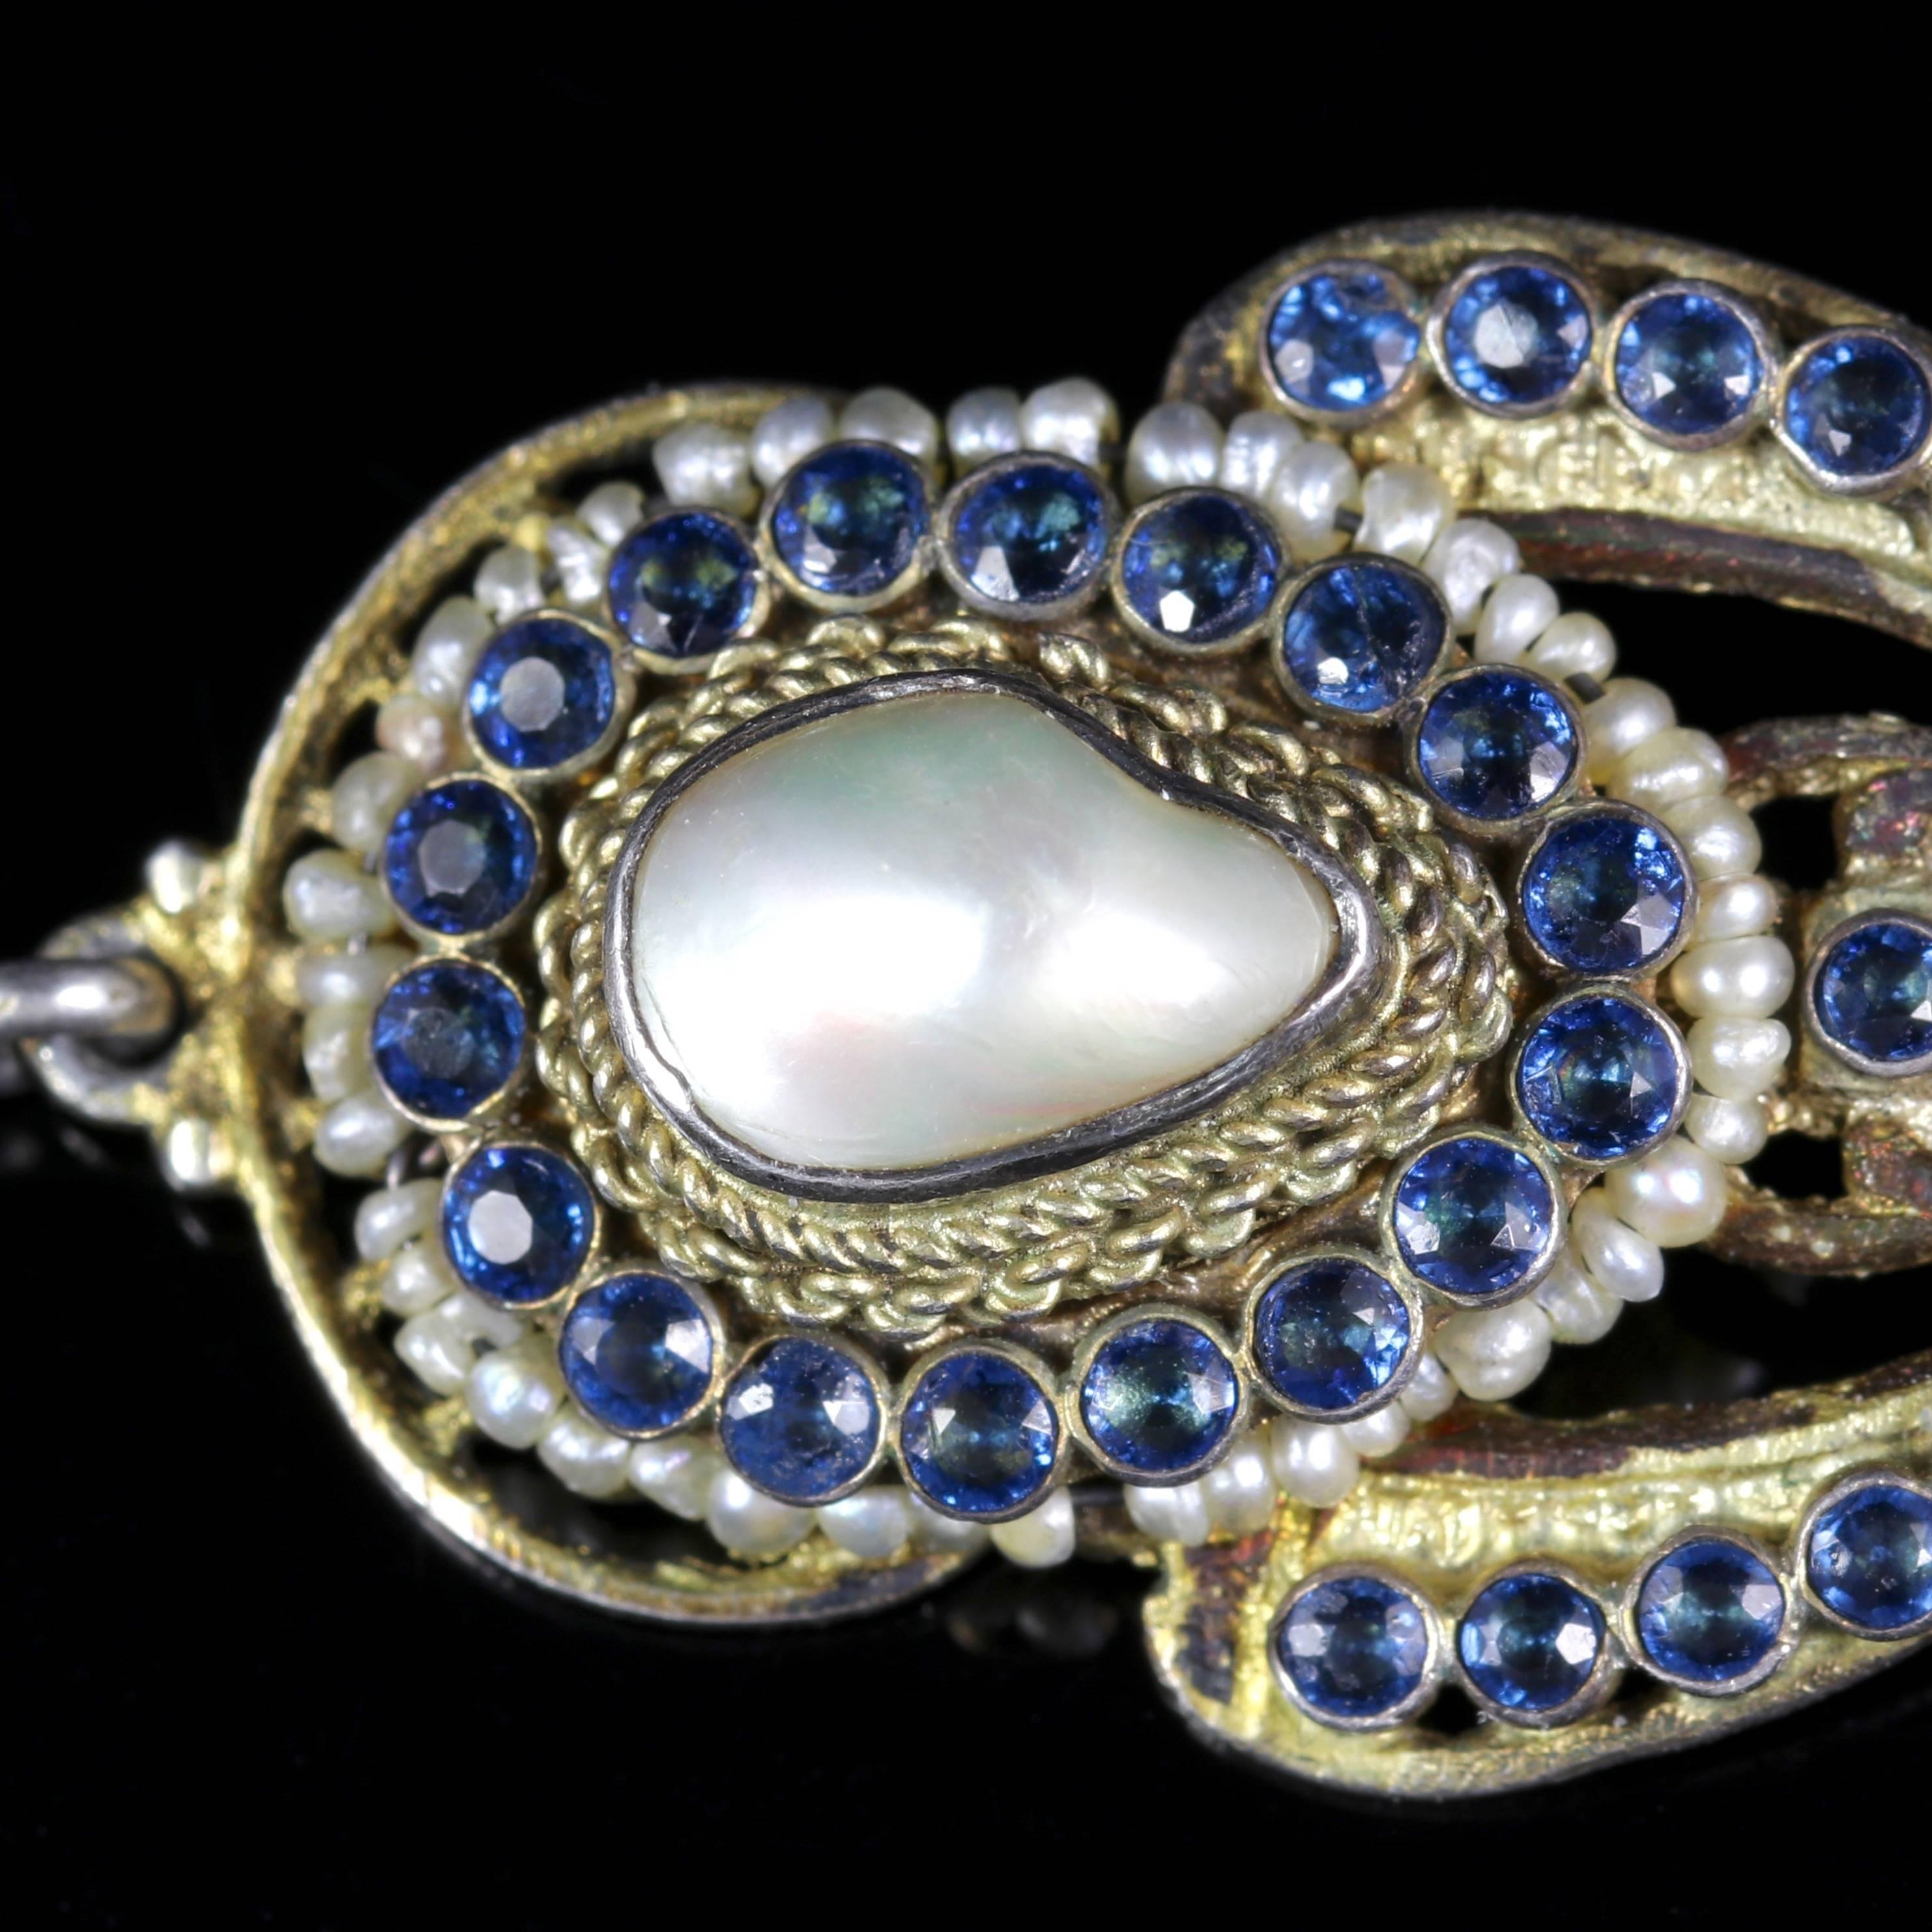 A genuine pair of Victorian Silver gilt earrings which are set with natural rich blue Sapphires and Baroque Pearls.

Three beautiful Baroque Pearls sit in the central gallery of the earrings.

Pearls have a wonderful lustre with a rich creamy tone,